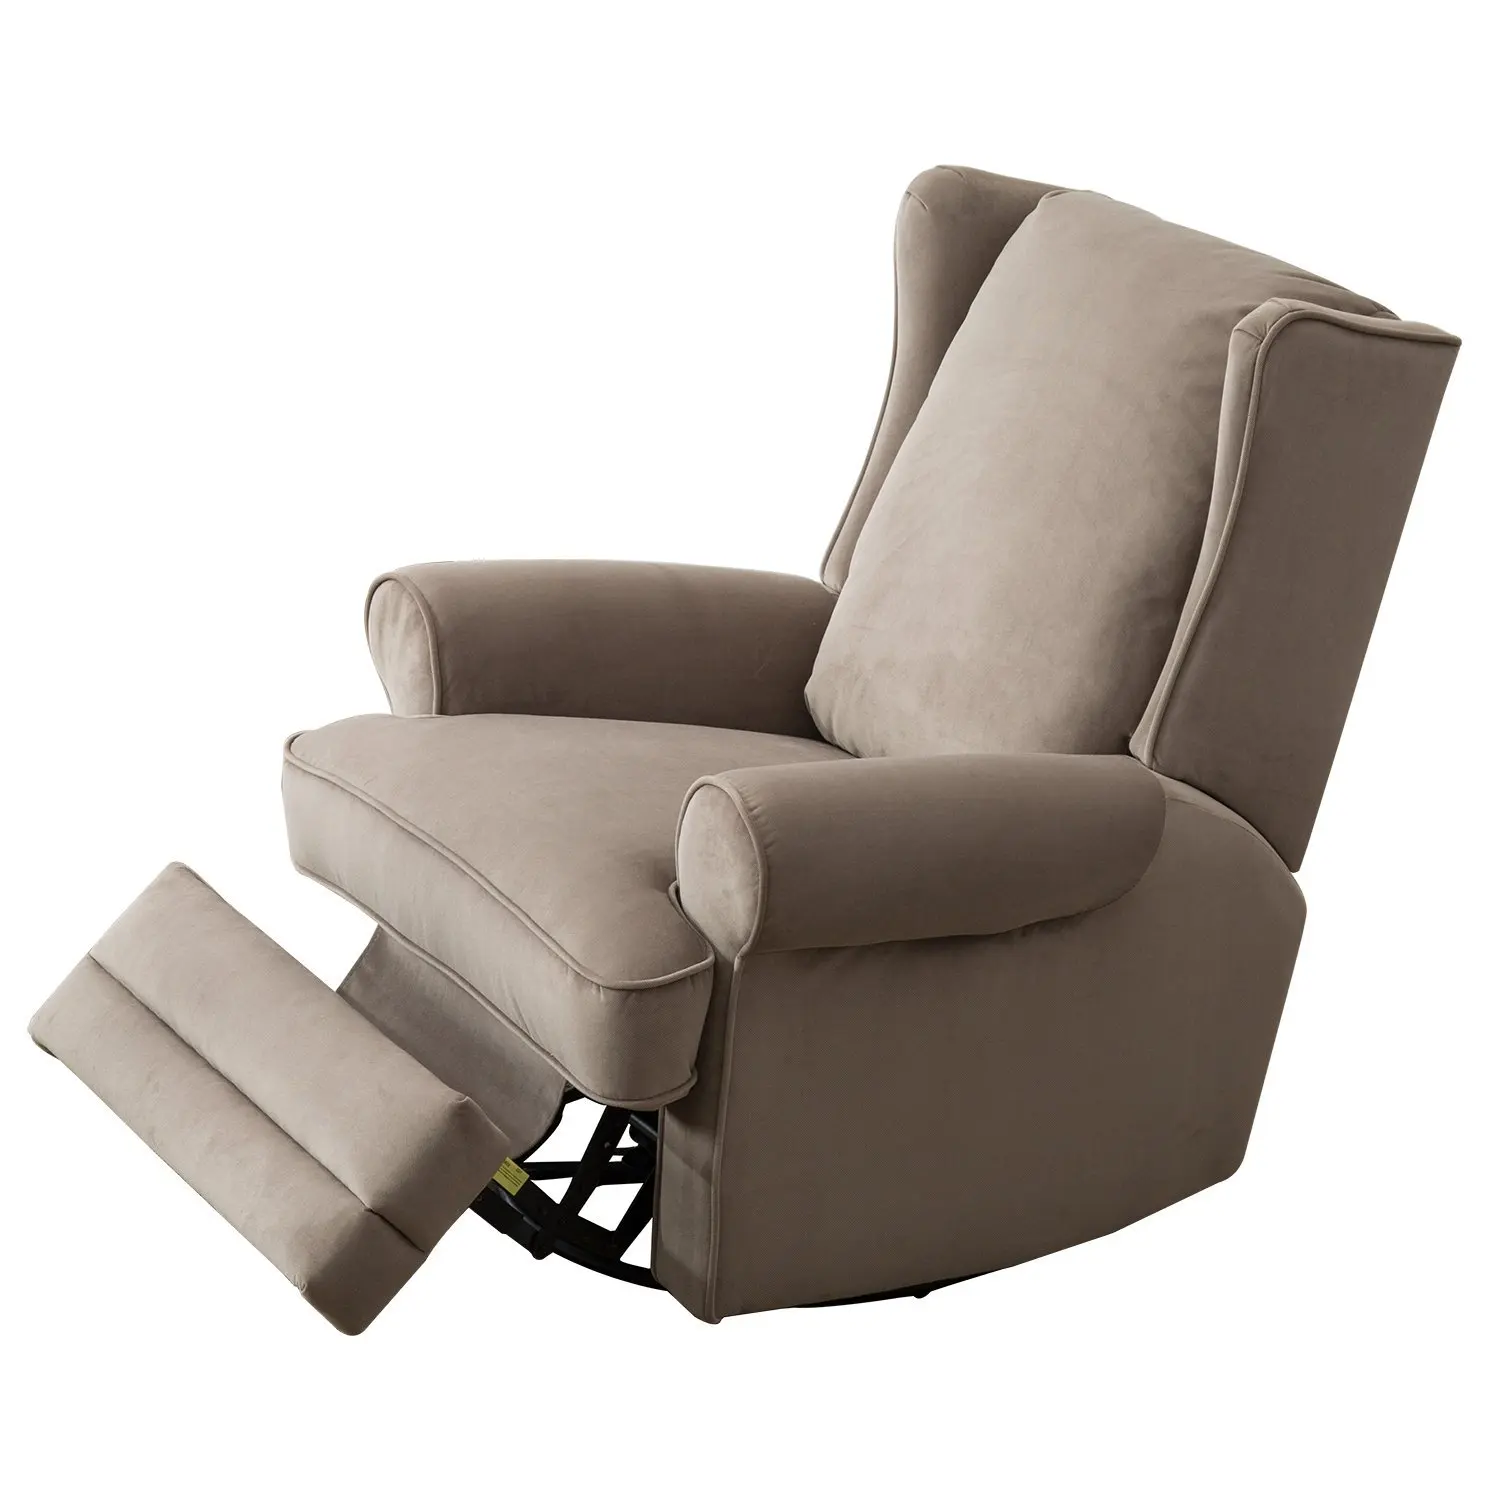 Cheap Wingback Recliner Chairs, find Wingback Recliner Chairs deals on